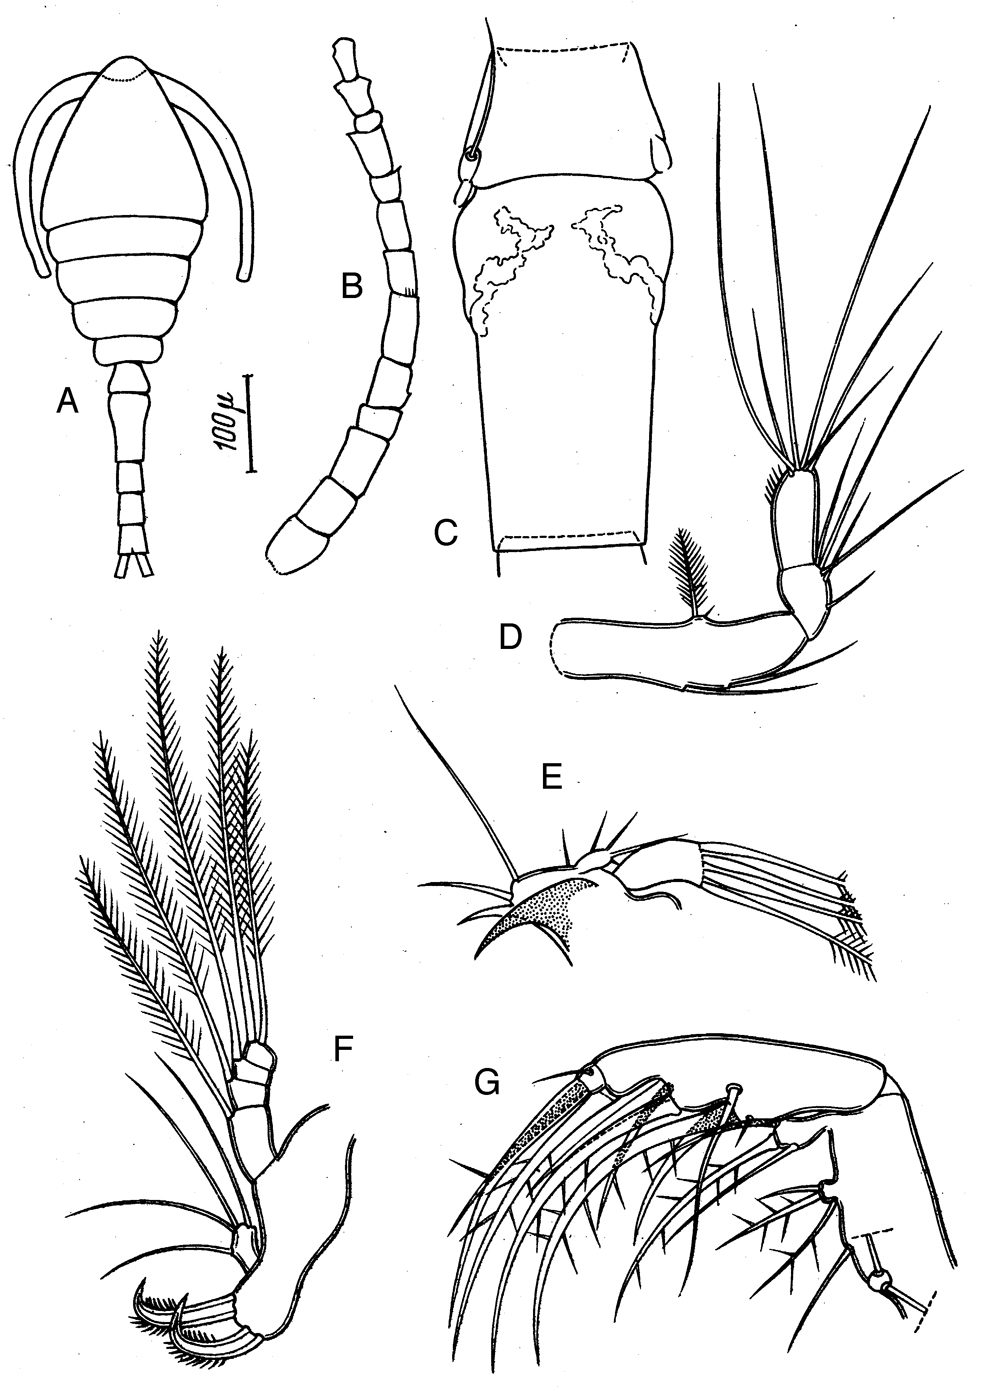 Species Oithona hebes - Plate 7 of morphological figures